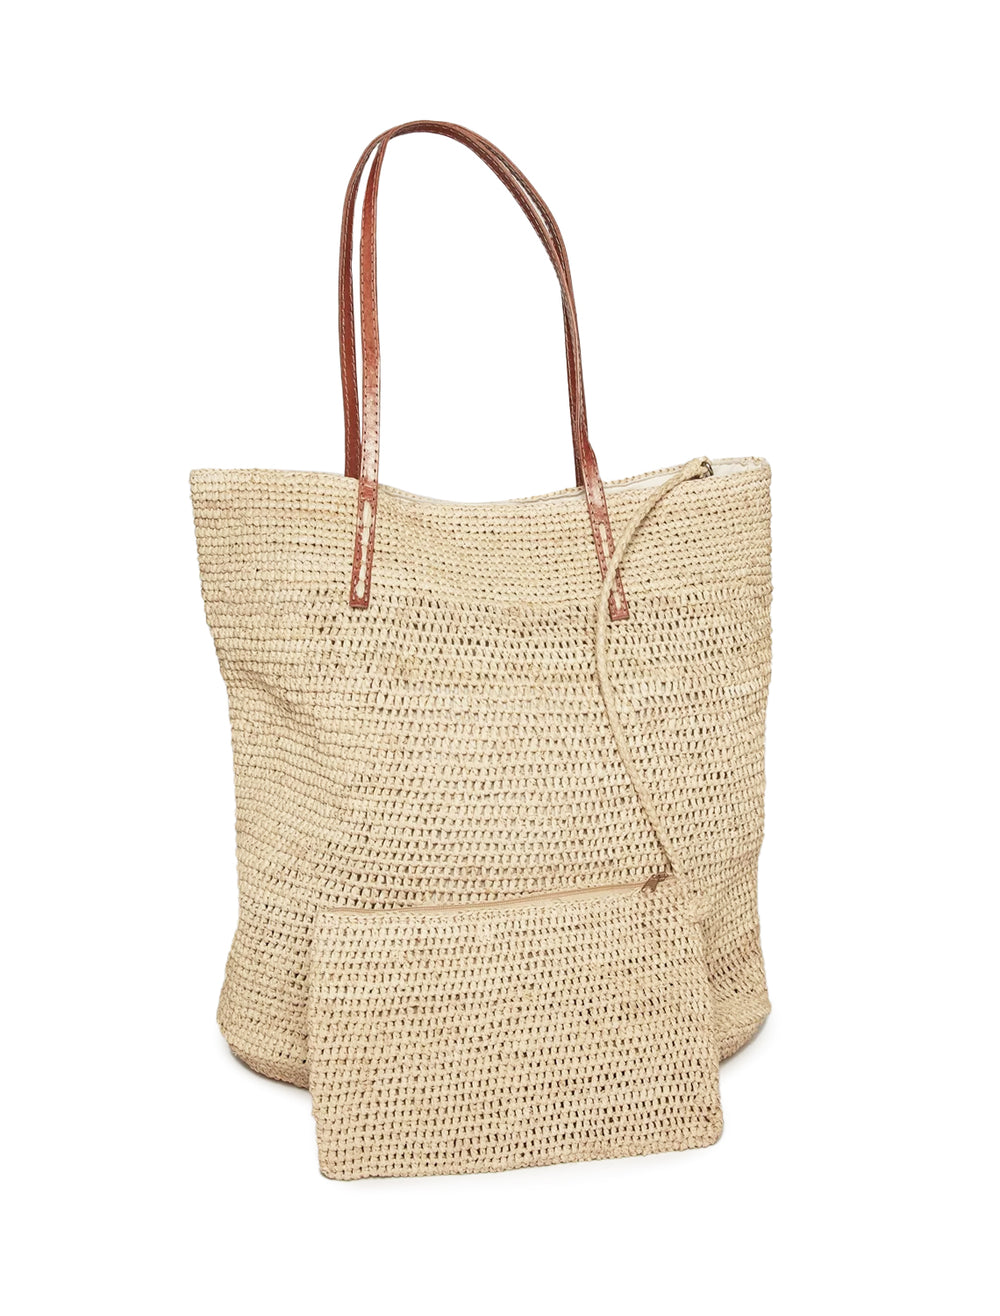 Front view of Hat Attack's lucia tote in natural with inside pouch shown.